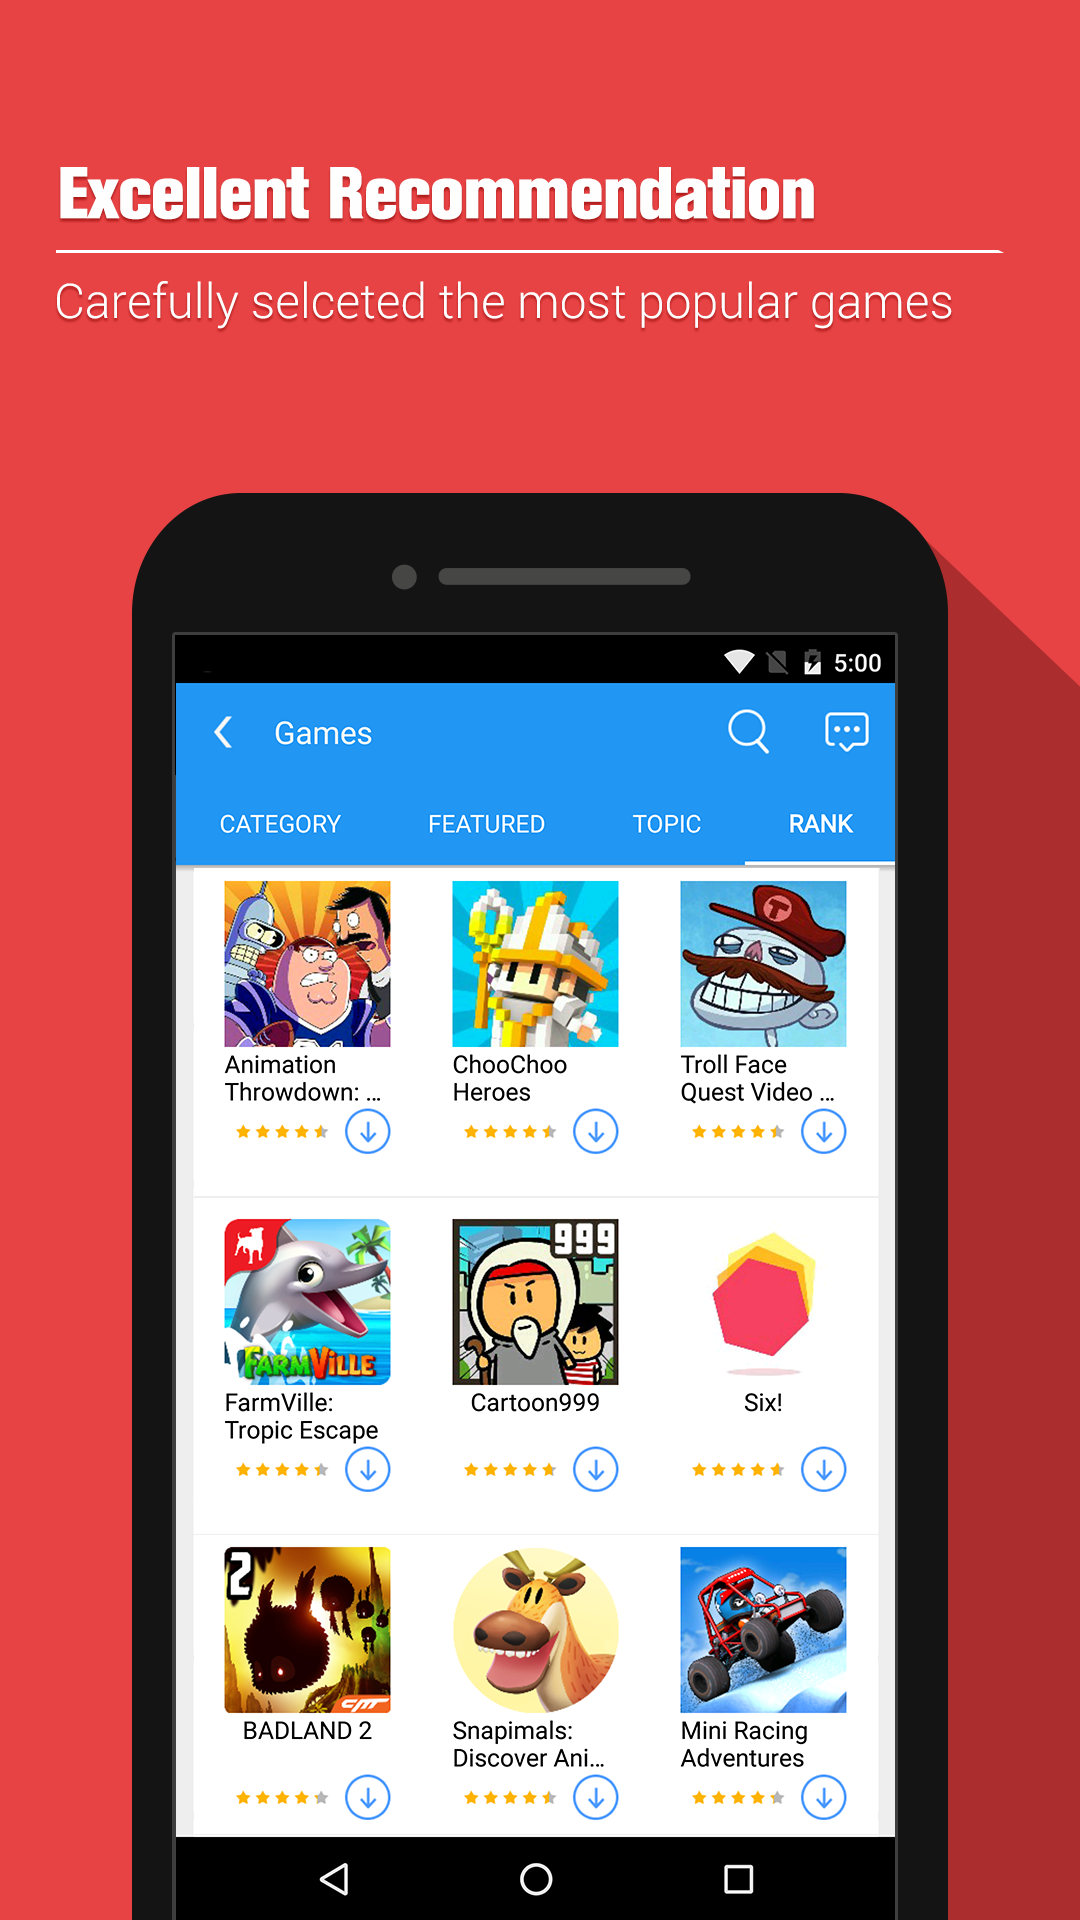 vShare App Market - App Store APK 1.0.0.5006 for Android – Download vShare  App Market - App Store APK Latest Version from APKFab.com